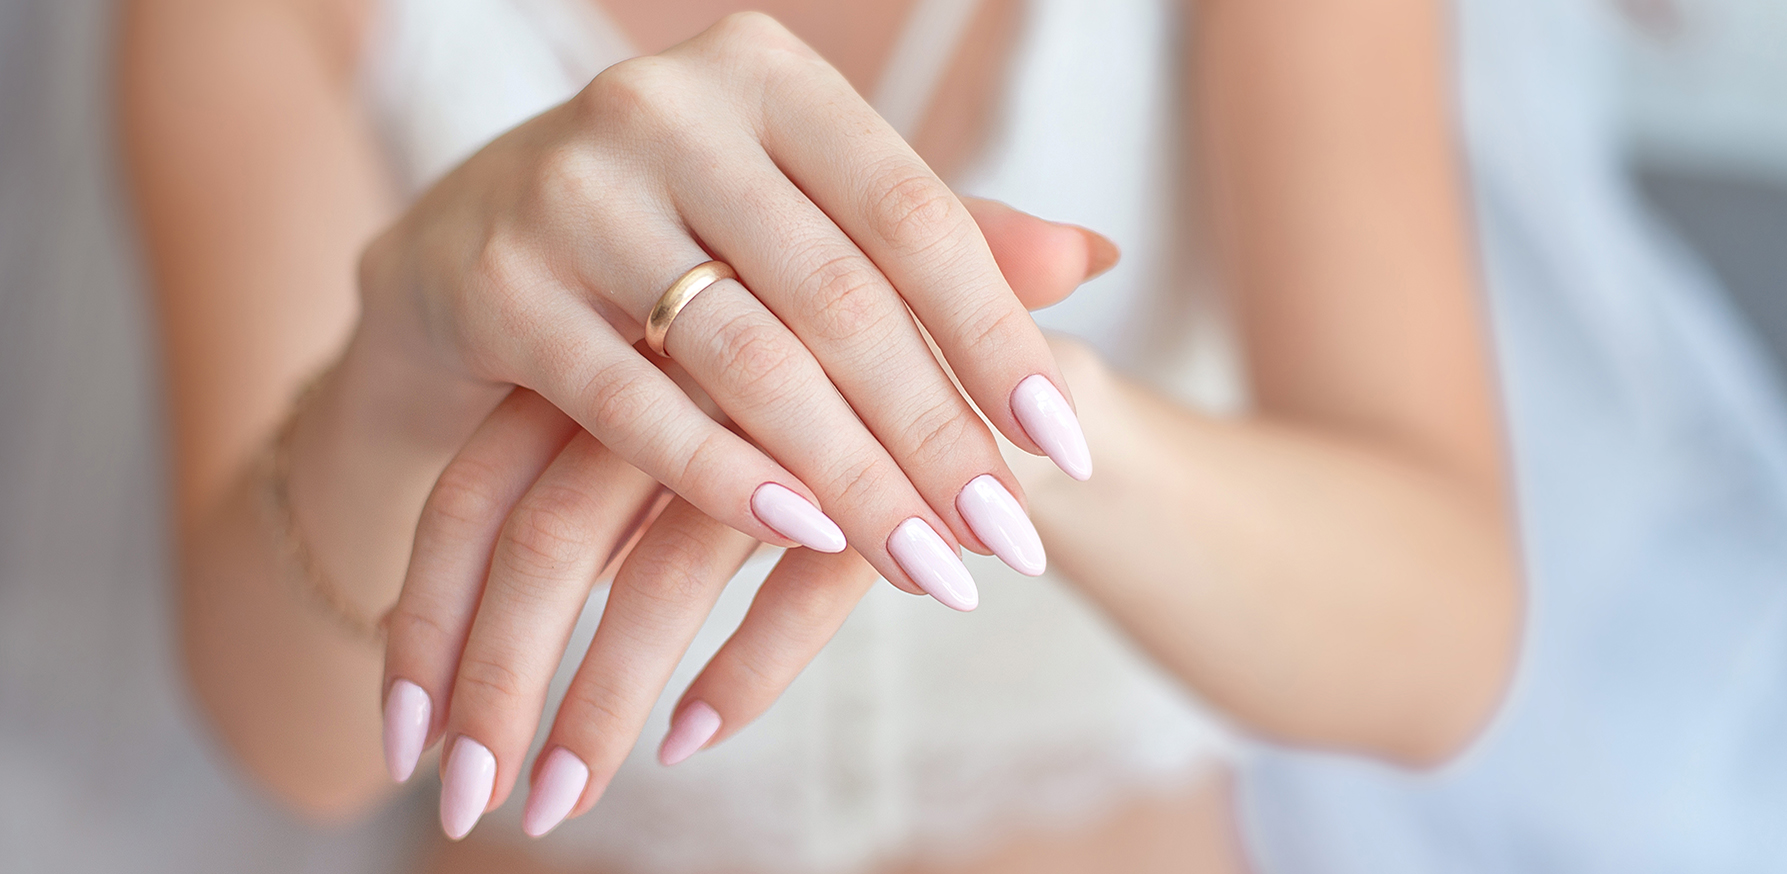 tips-to-level-up-your-manicure-at-home-woman-showing-nice-nails